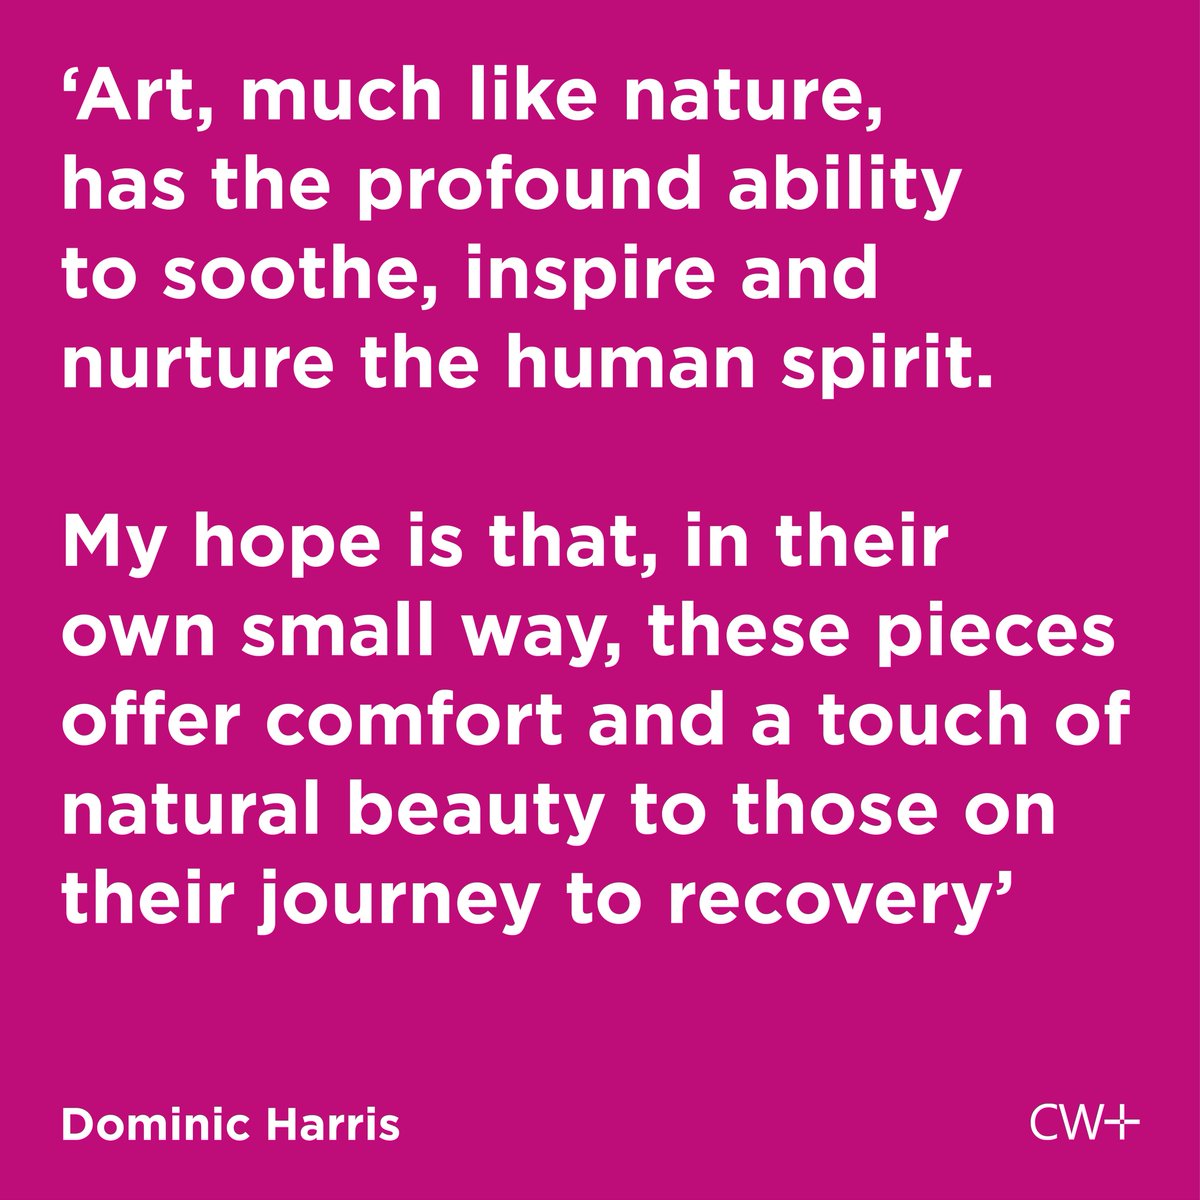 We recently installed a series of digital artworks by British artist Dominic Harris in the Haematology/Oncology Day Unit at @WestMidHospital 🦋 Dominic tells us about the importance of #ArtsInHealth. Read the news story to learn more about the project. bit.ly/3VPFx4u